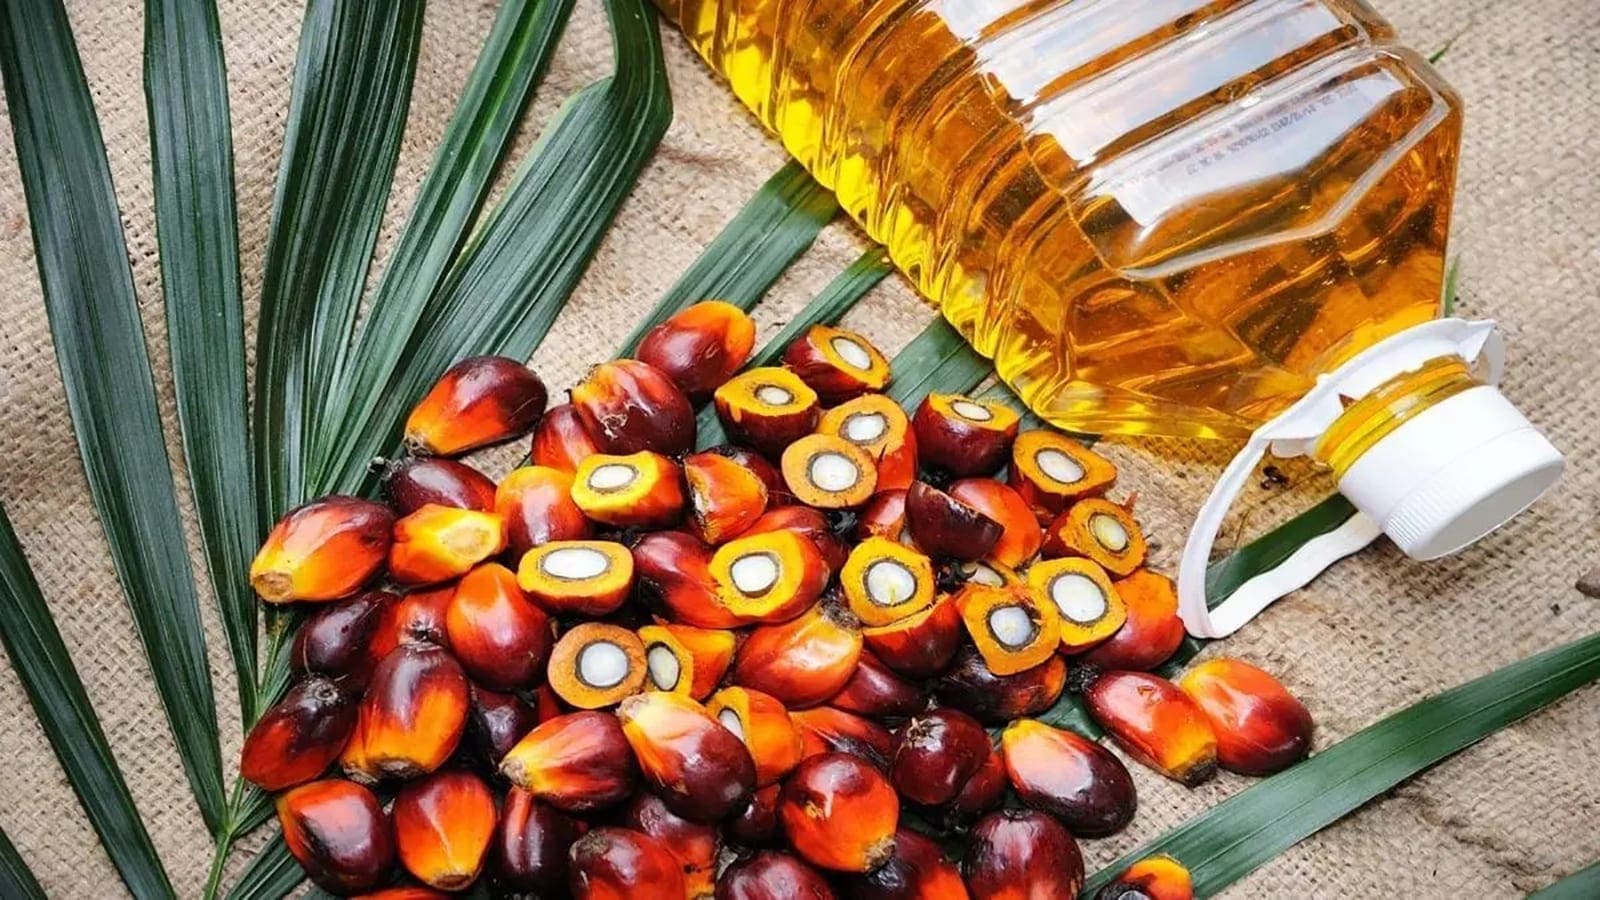 Nigeria’s growing appetite for palm kernel oil, meal set to propel production rate